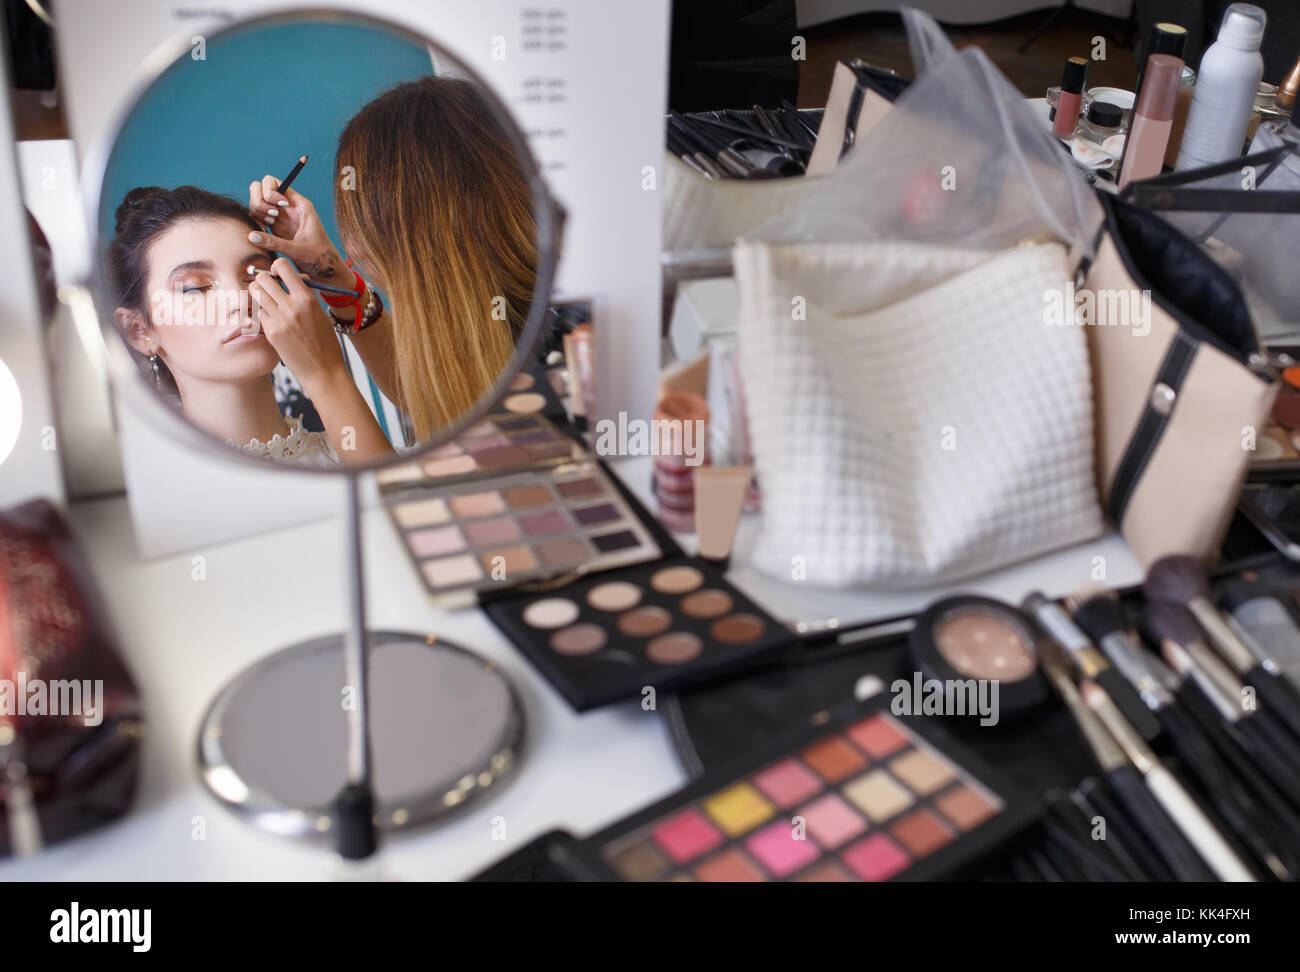 professional makeup artist doing makeup for Make up artist work in beauty salon. Reflection in the mirror as visagist applying makeup. Backstage Stock Photo -